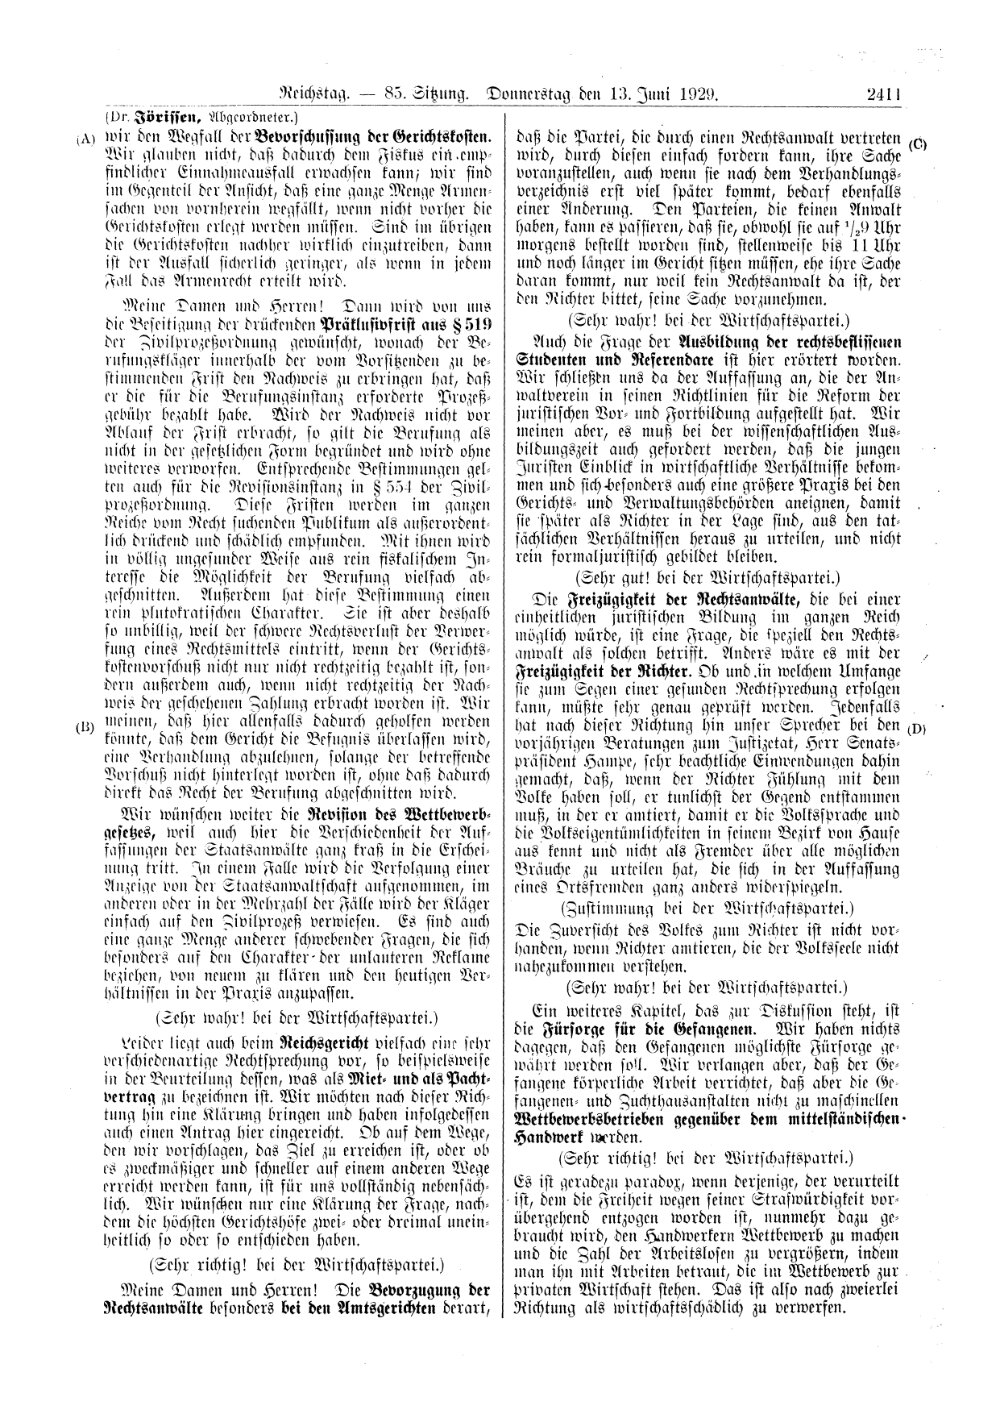 Scan of page 2411